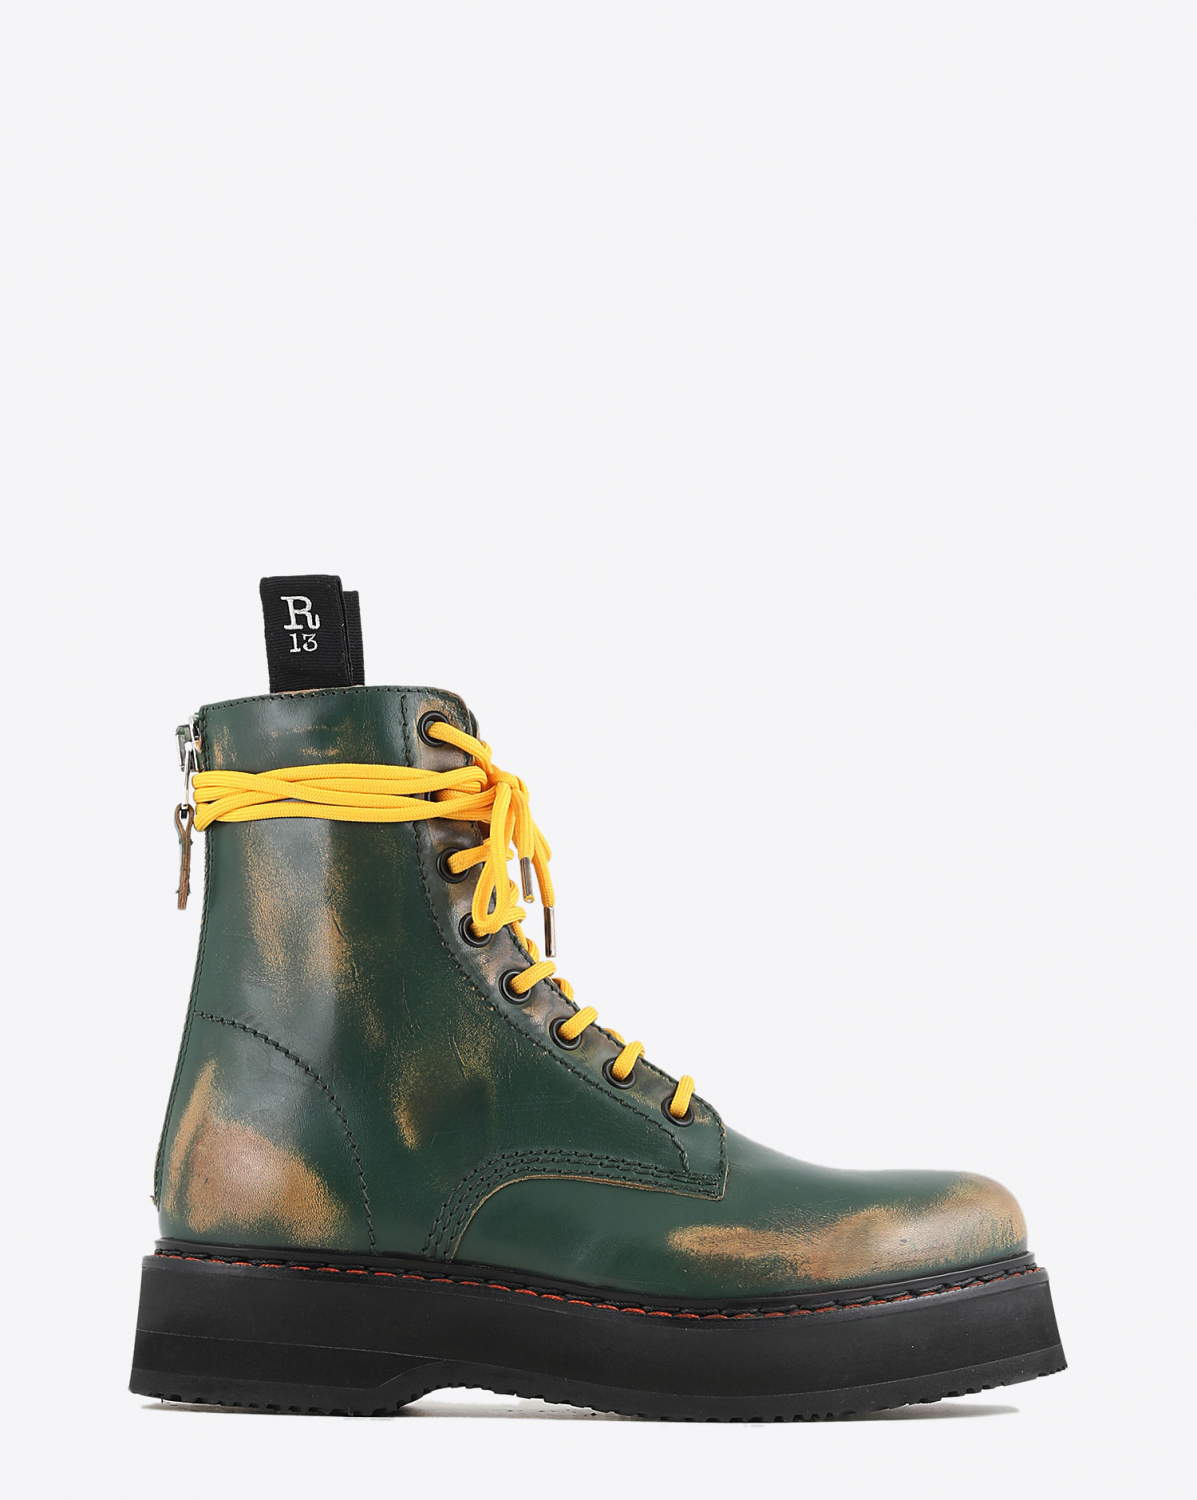 Boots R13 Denim Collection Single Stack Boot - Hunter Green Remove